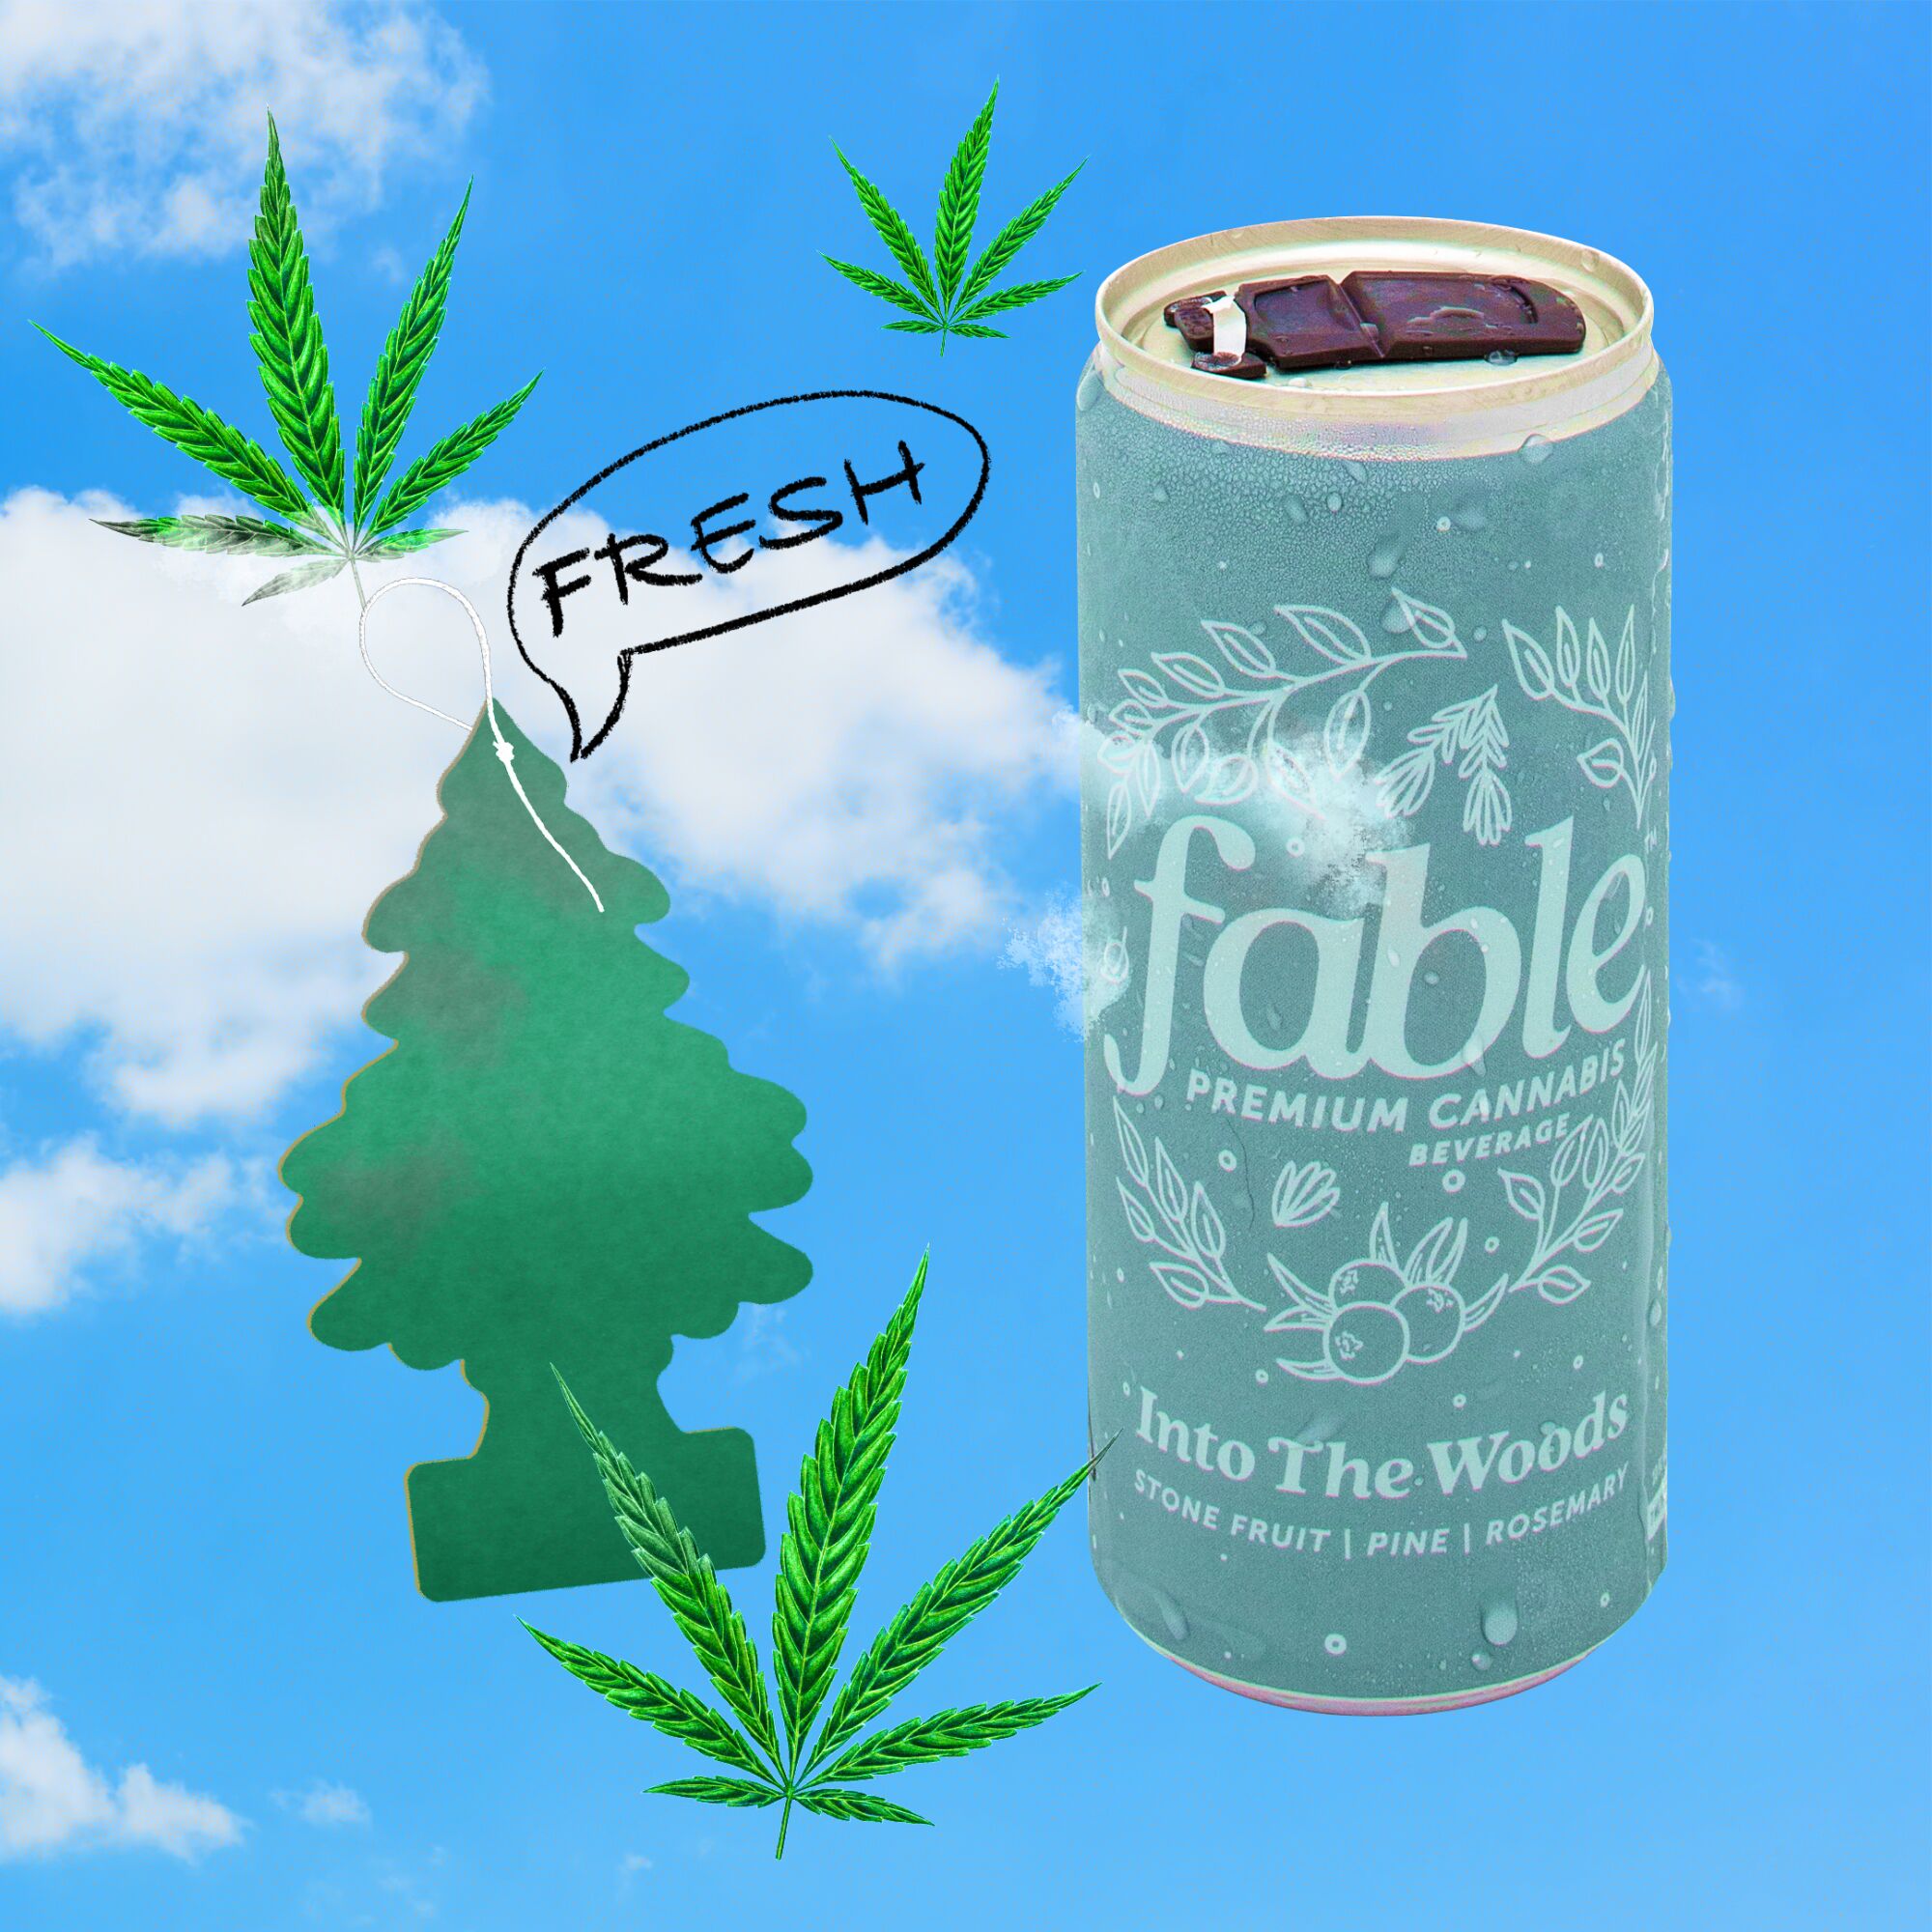 A can of Fable's Into the Woods beverage surrounded by cannabis leaves and a tree-shaped air freshener.